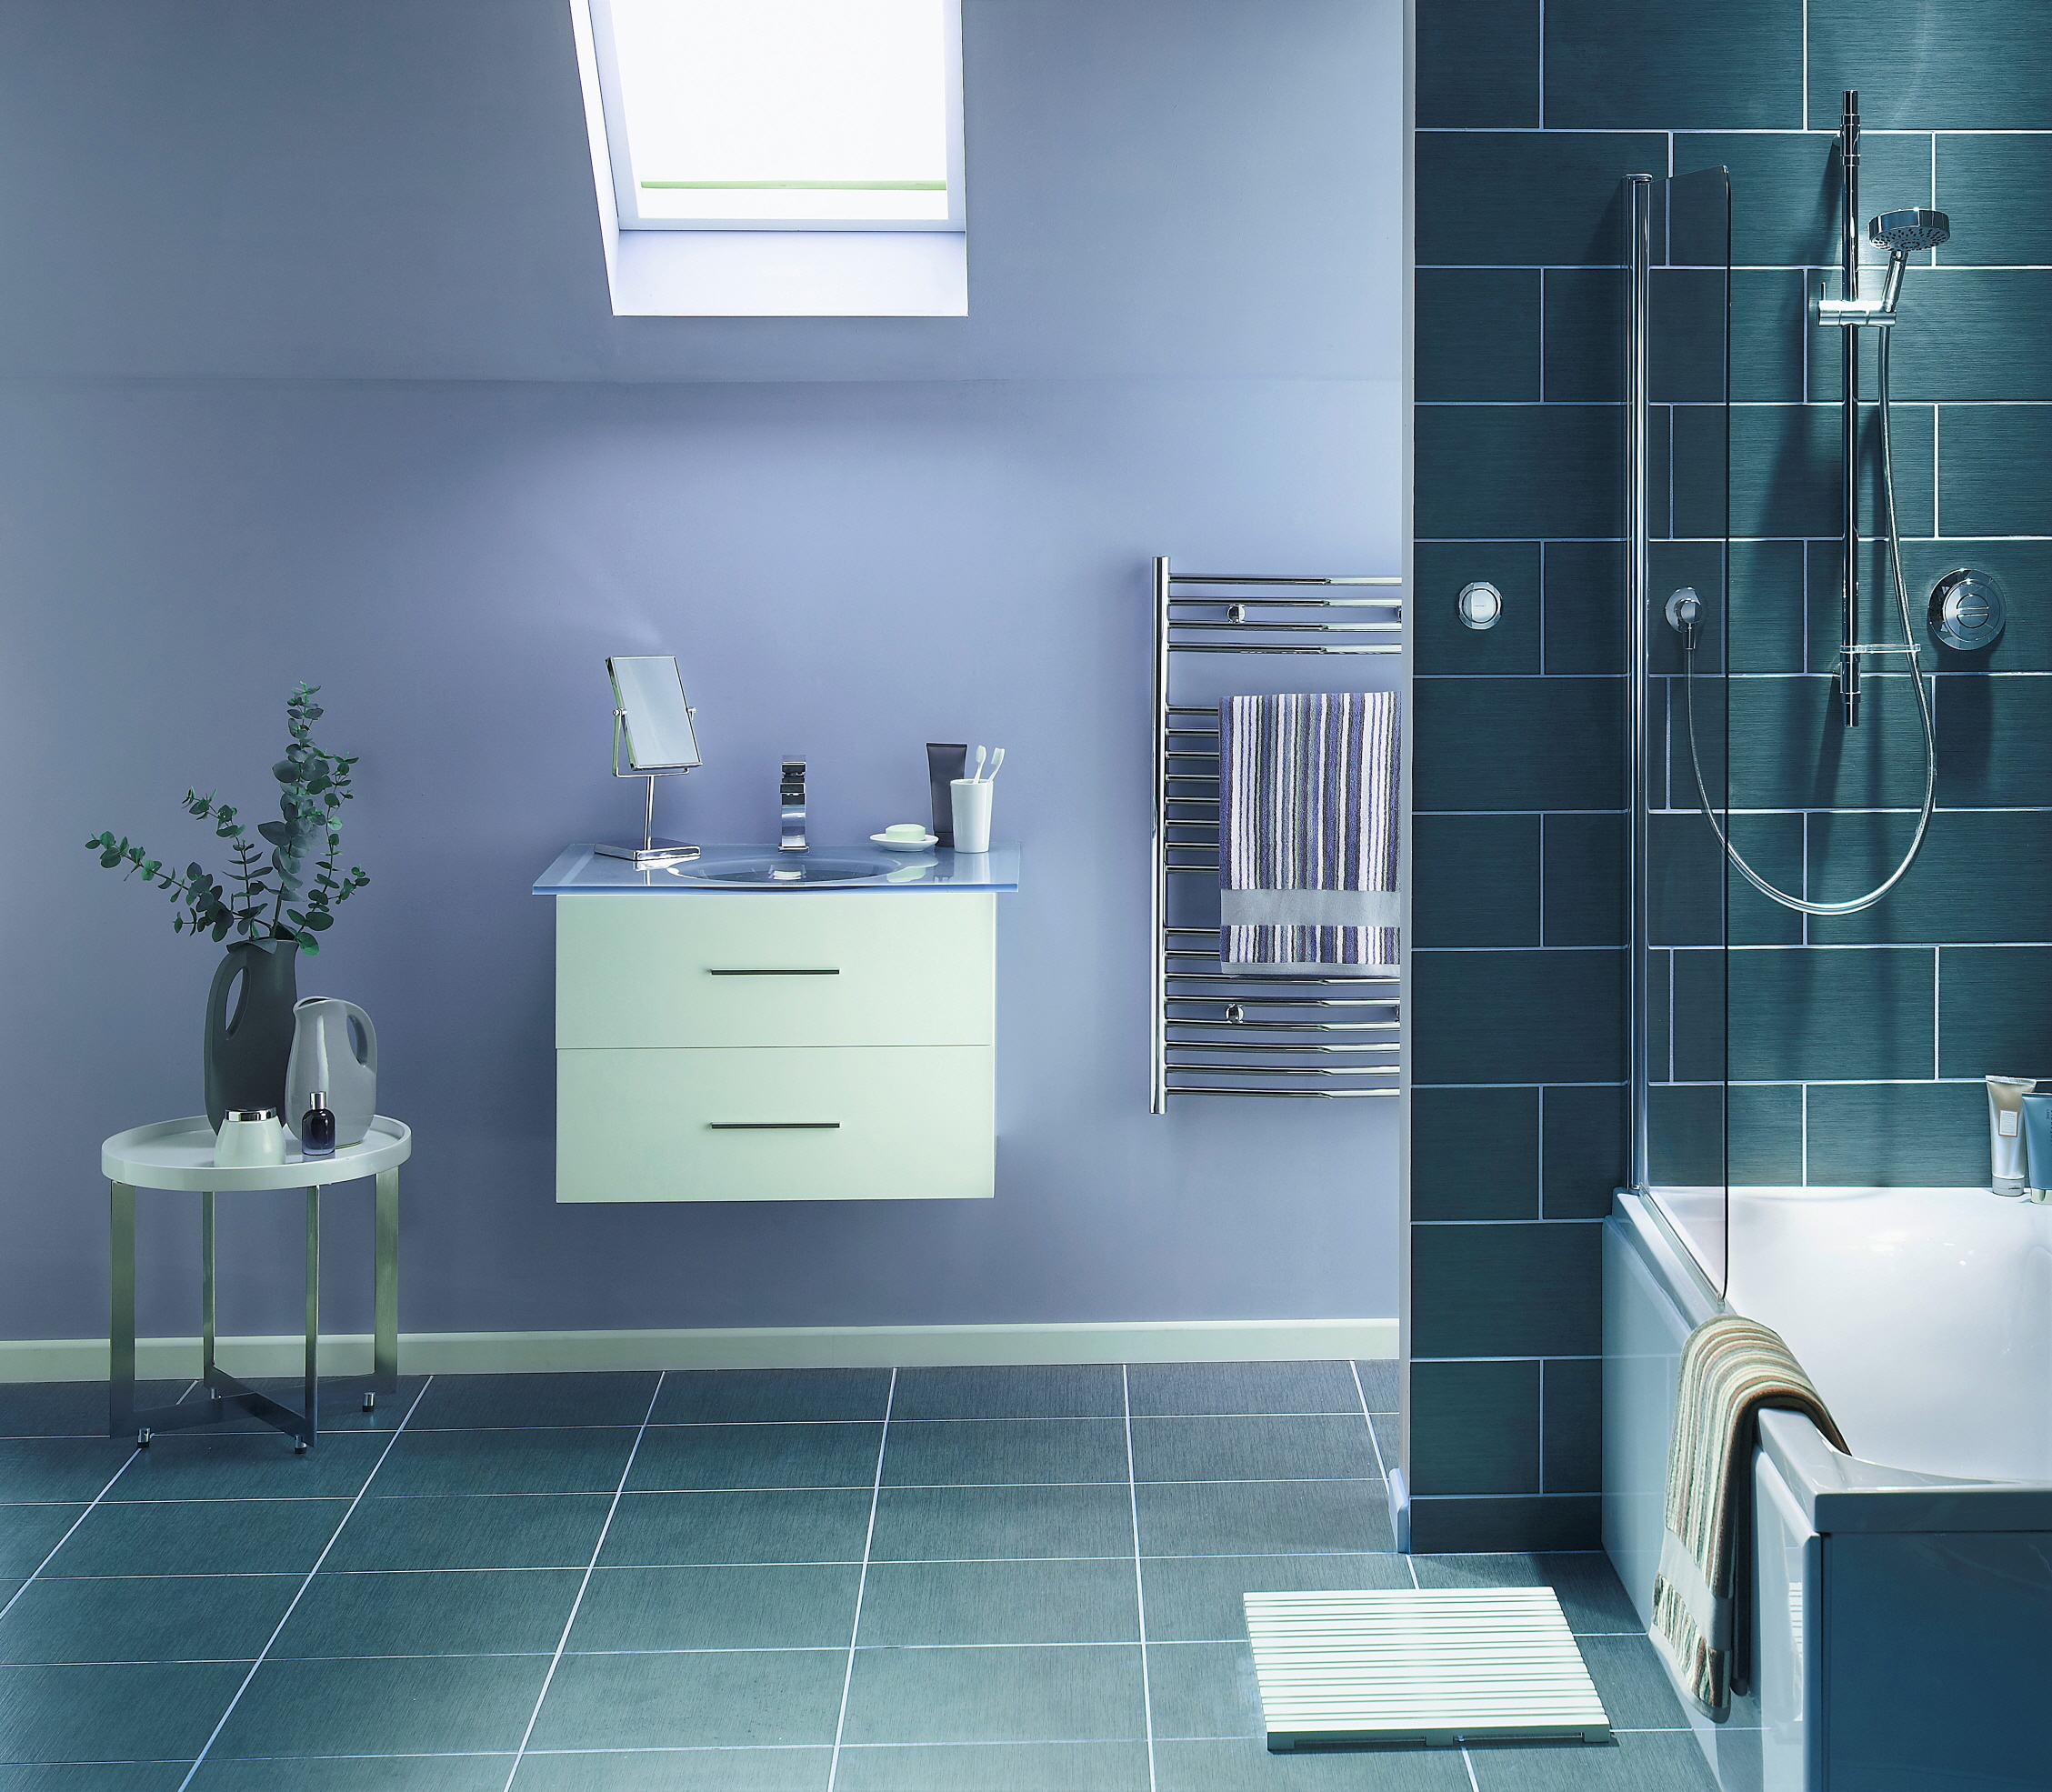 Cerulean offers a calming and spacious bathroom ambiance.